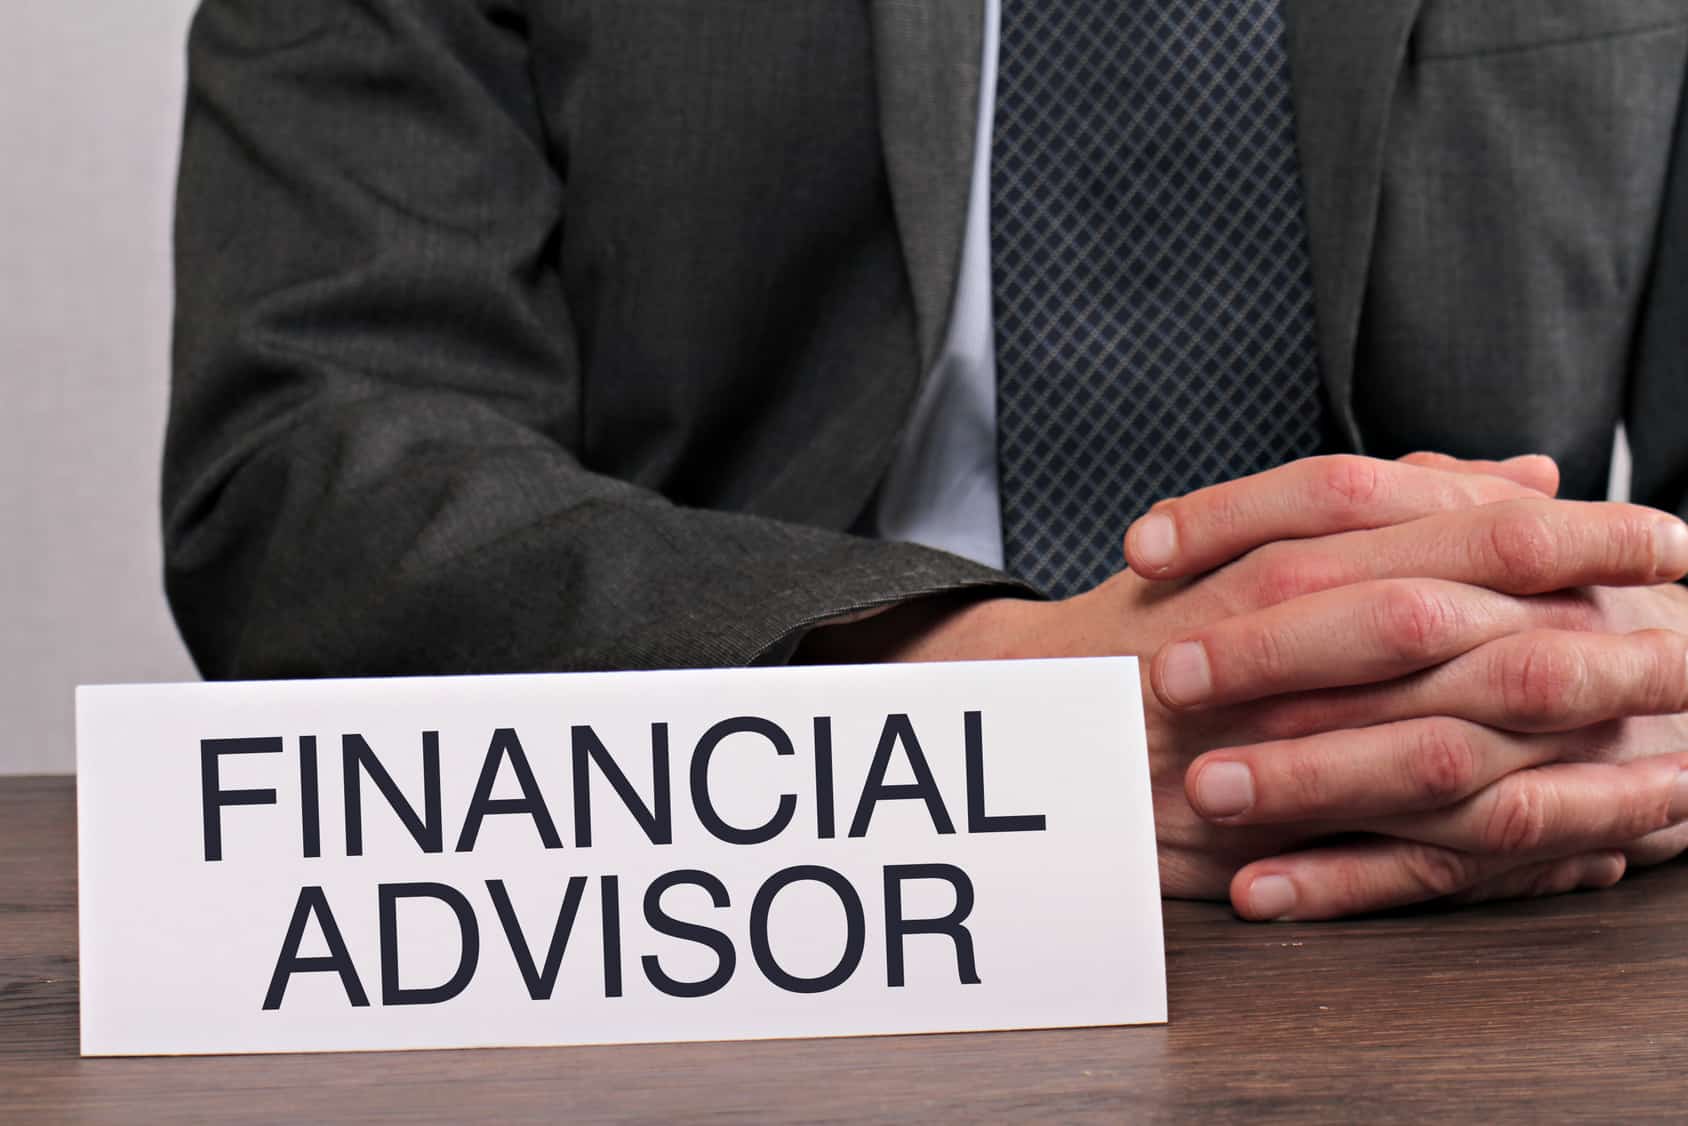 A Guide to Check Your Financial Advisor's Credentials